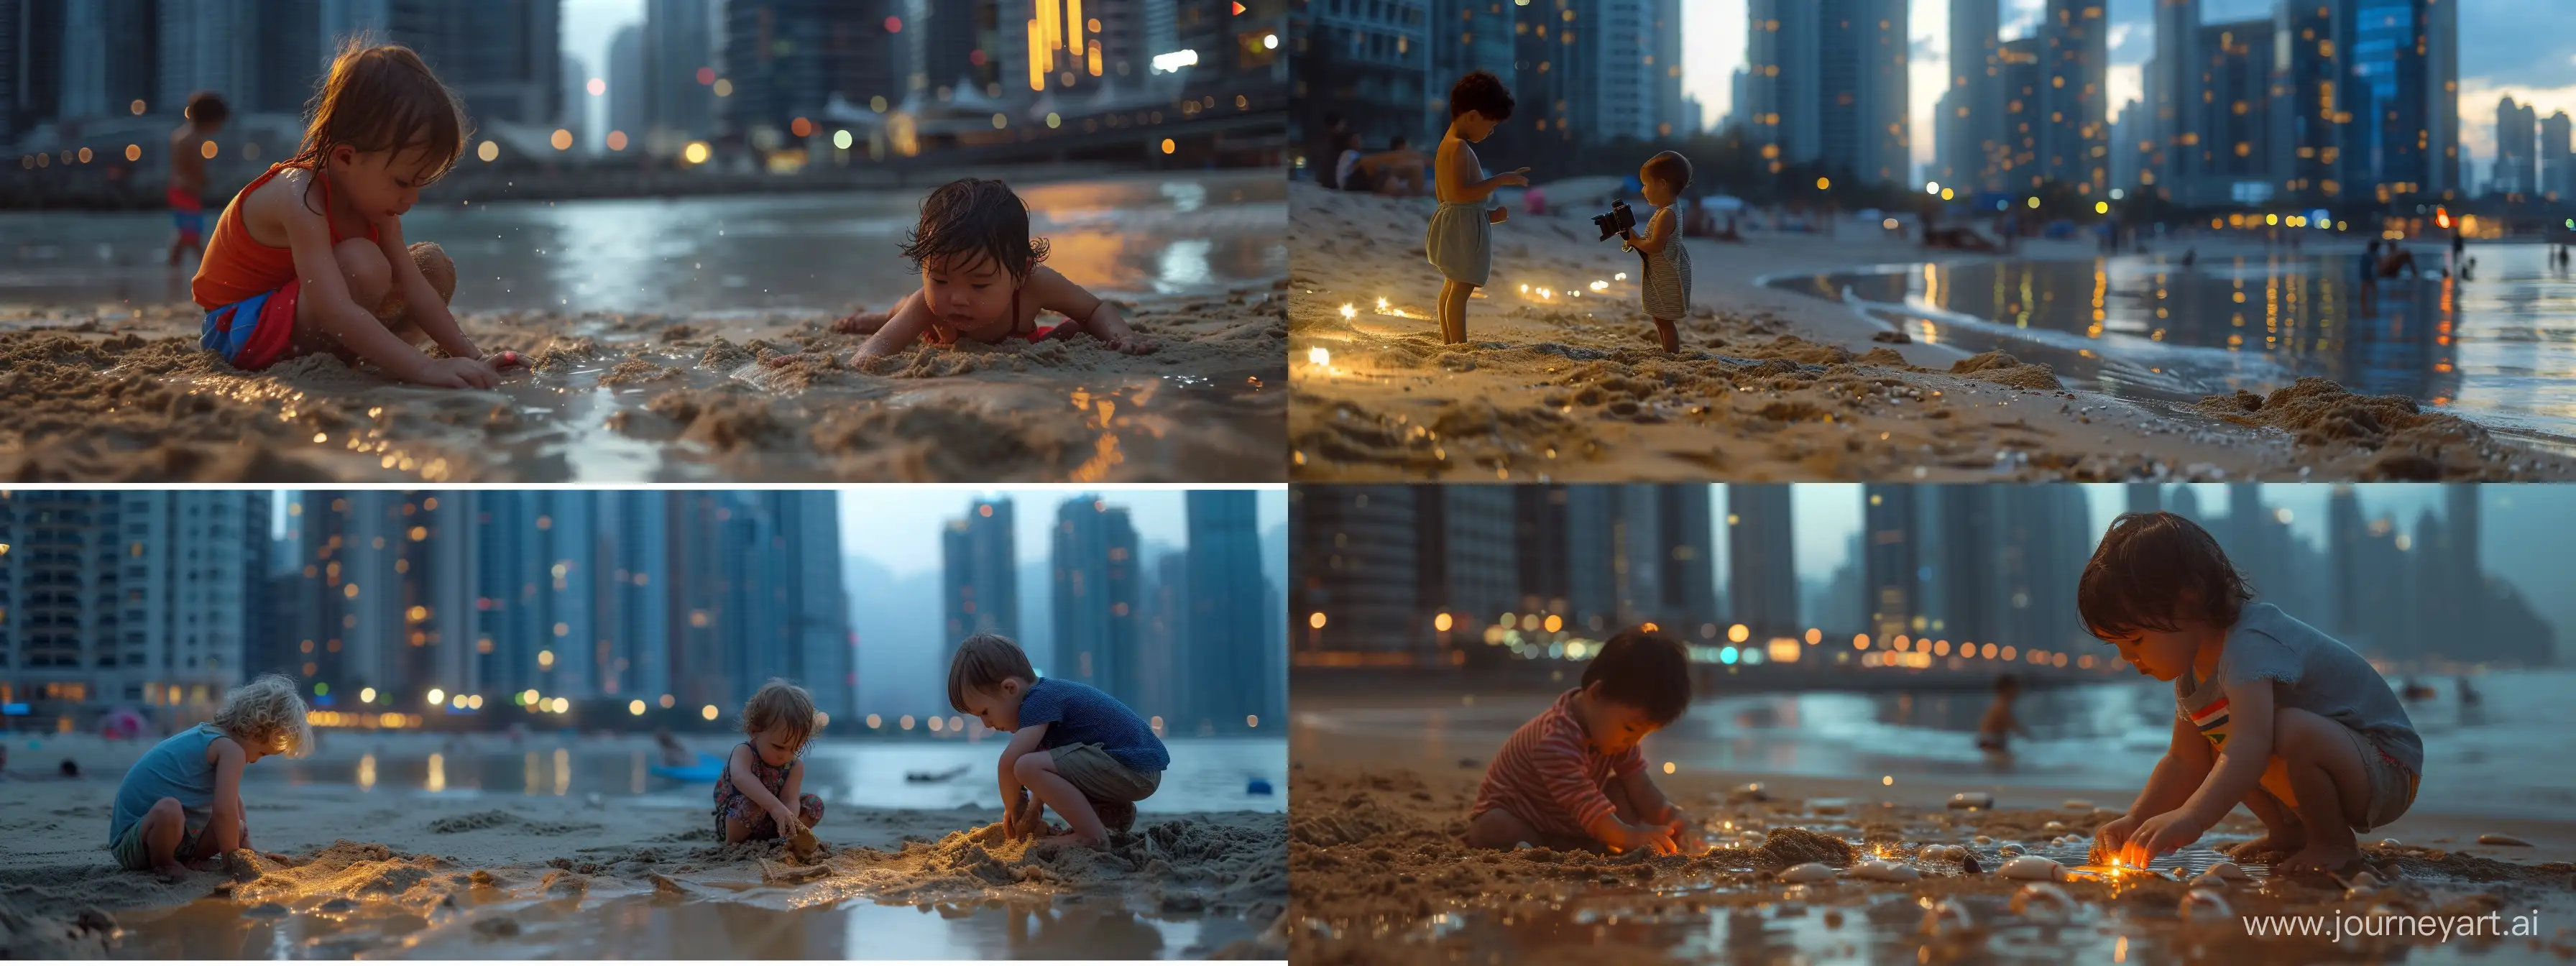 using filming techniques, lighting, lights, reflection and details from the feature film "Piper discovering the world", these techniques have to be used in the sand, in the water, on children, children playing on the beach, a hyper realistic film scene, use a camera Nikon D850 DSLR with 200mm lens with F 1.2 aperture to isolate the subject and add a blurred background of skyscrapers, 4k film, absurd details, --ar 8:3 --v 6.0 --style raw